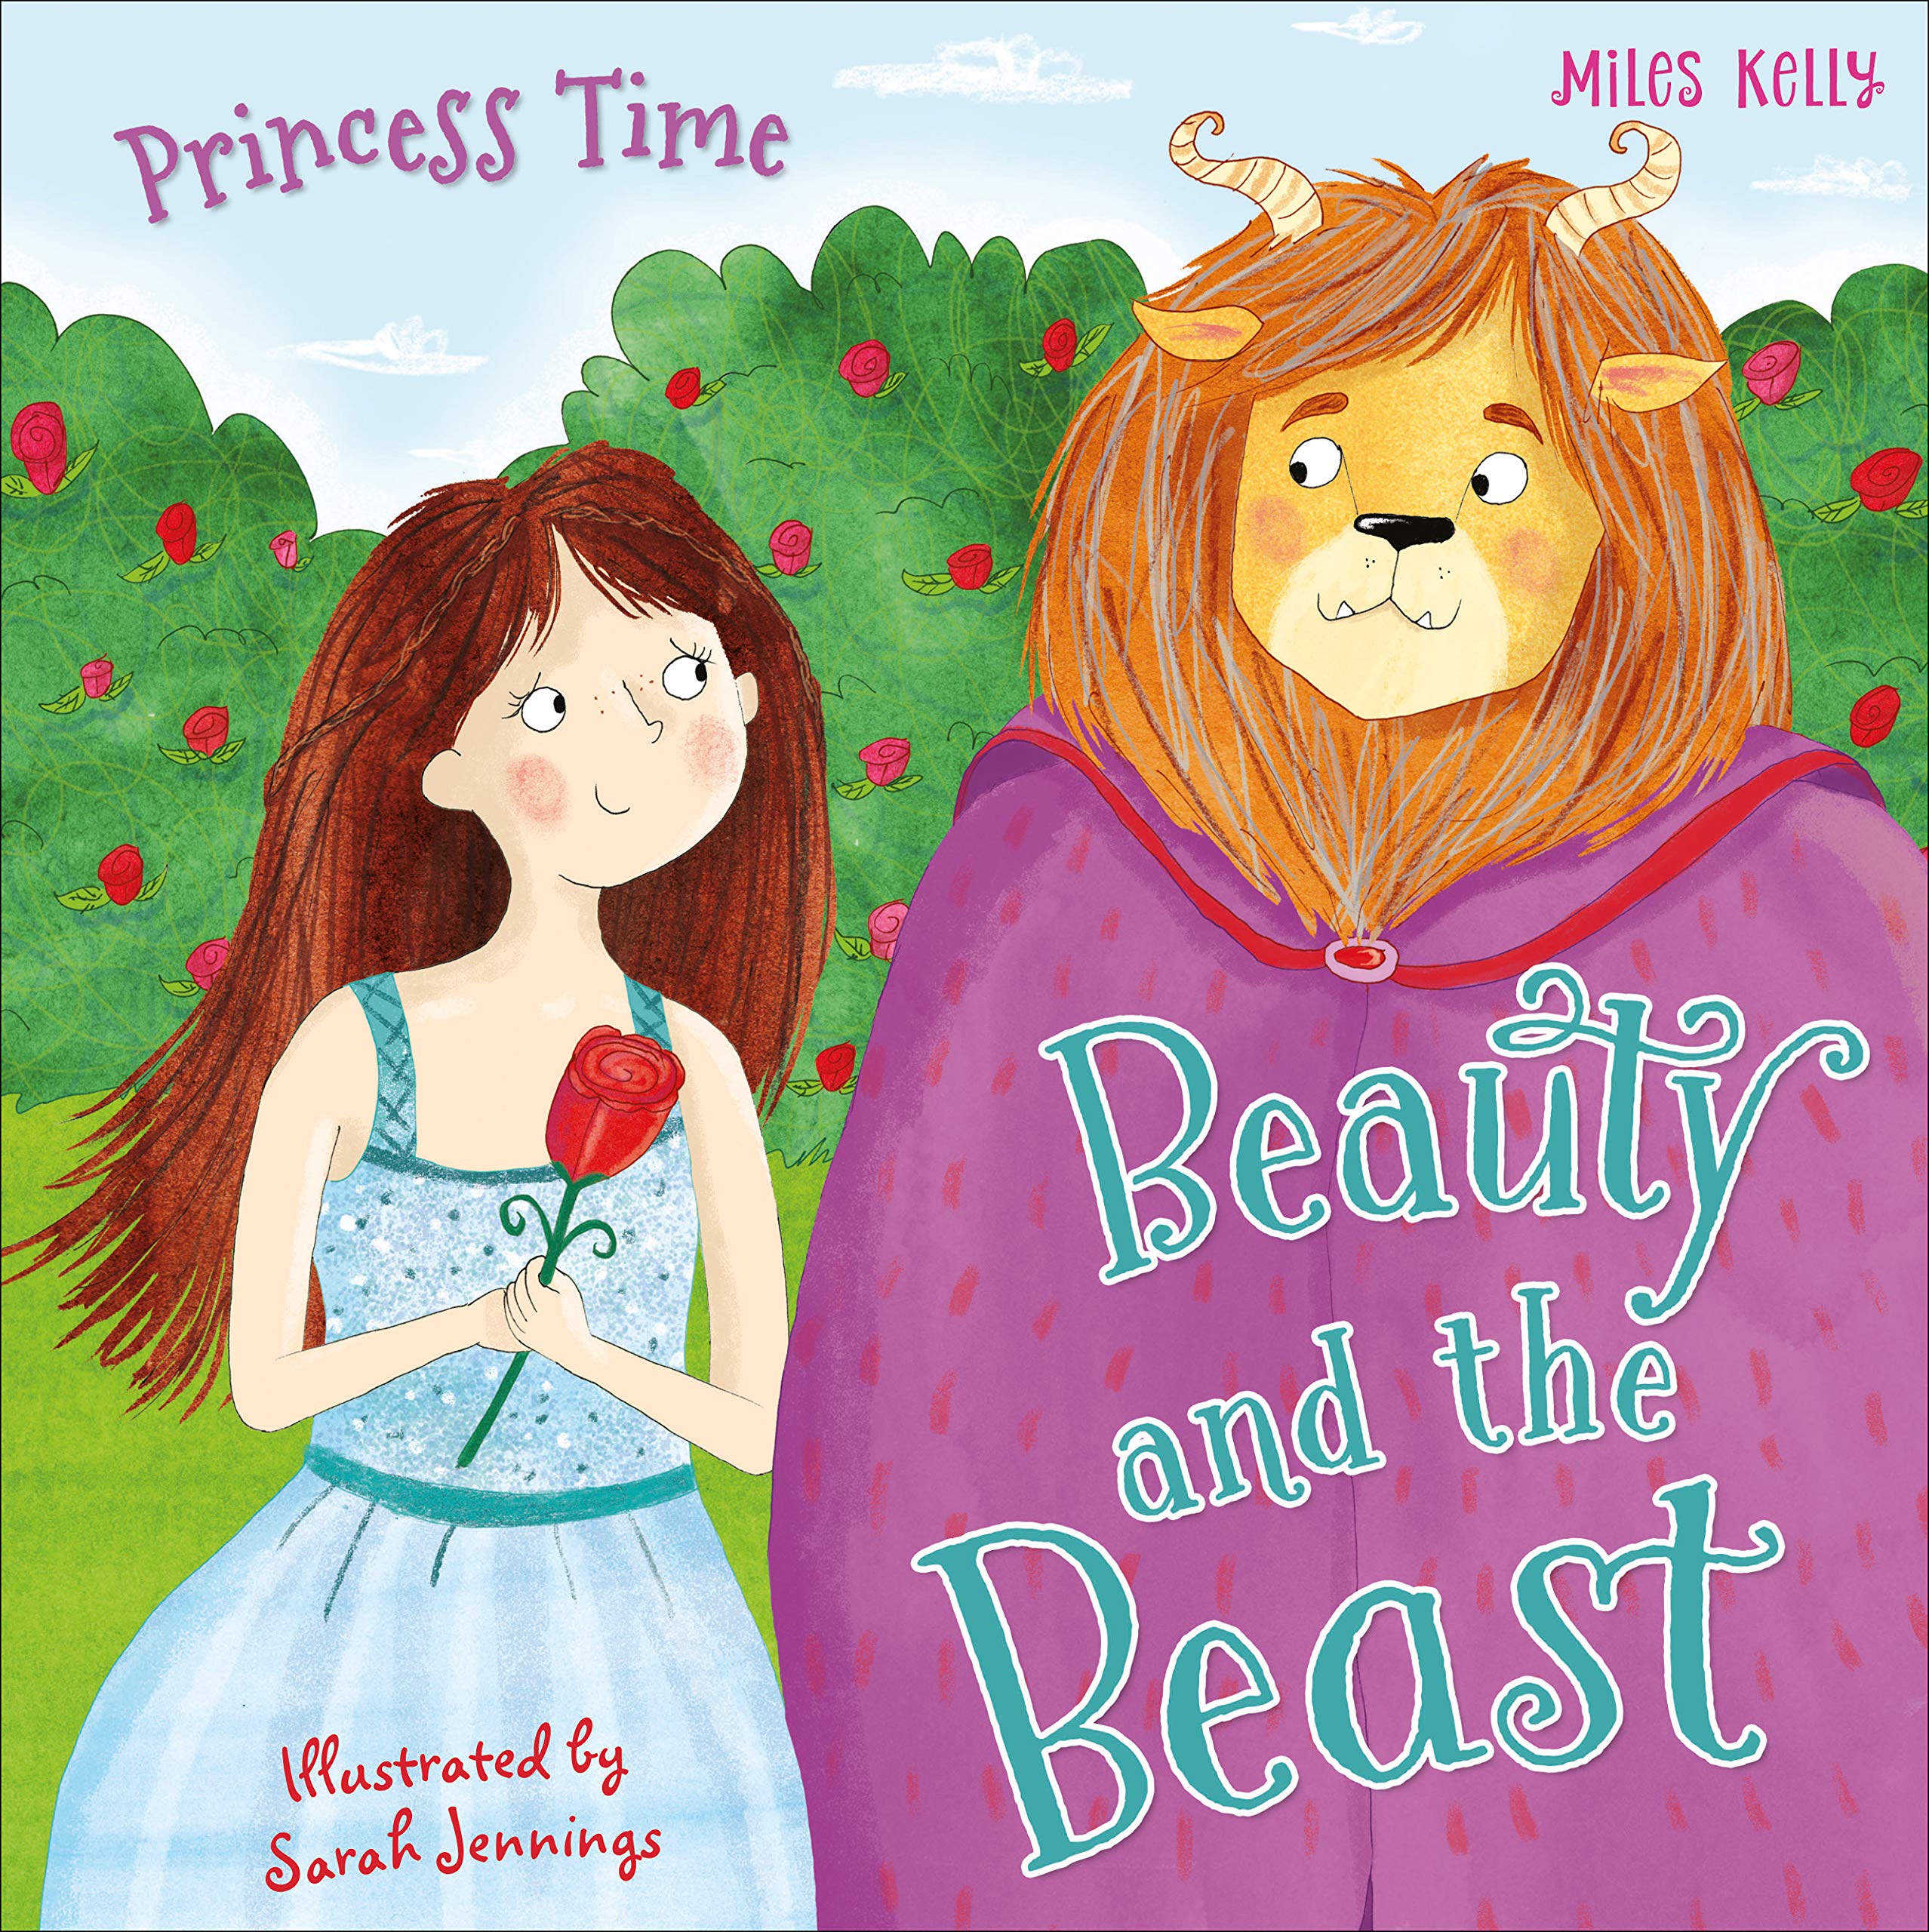 Princess Time: Beauty and the Beast by Miles Kelly